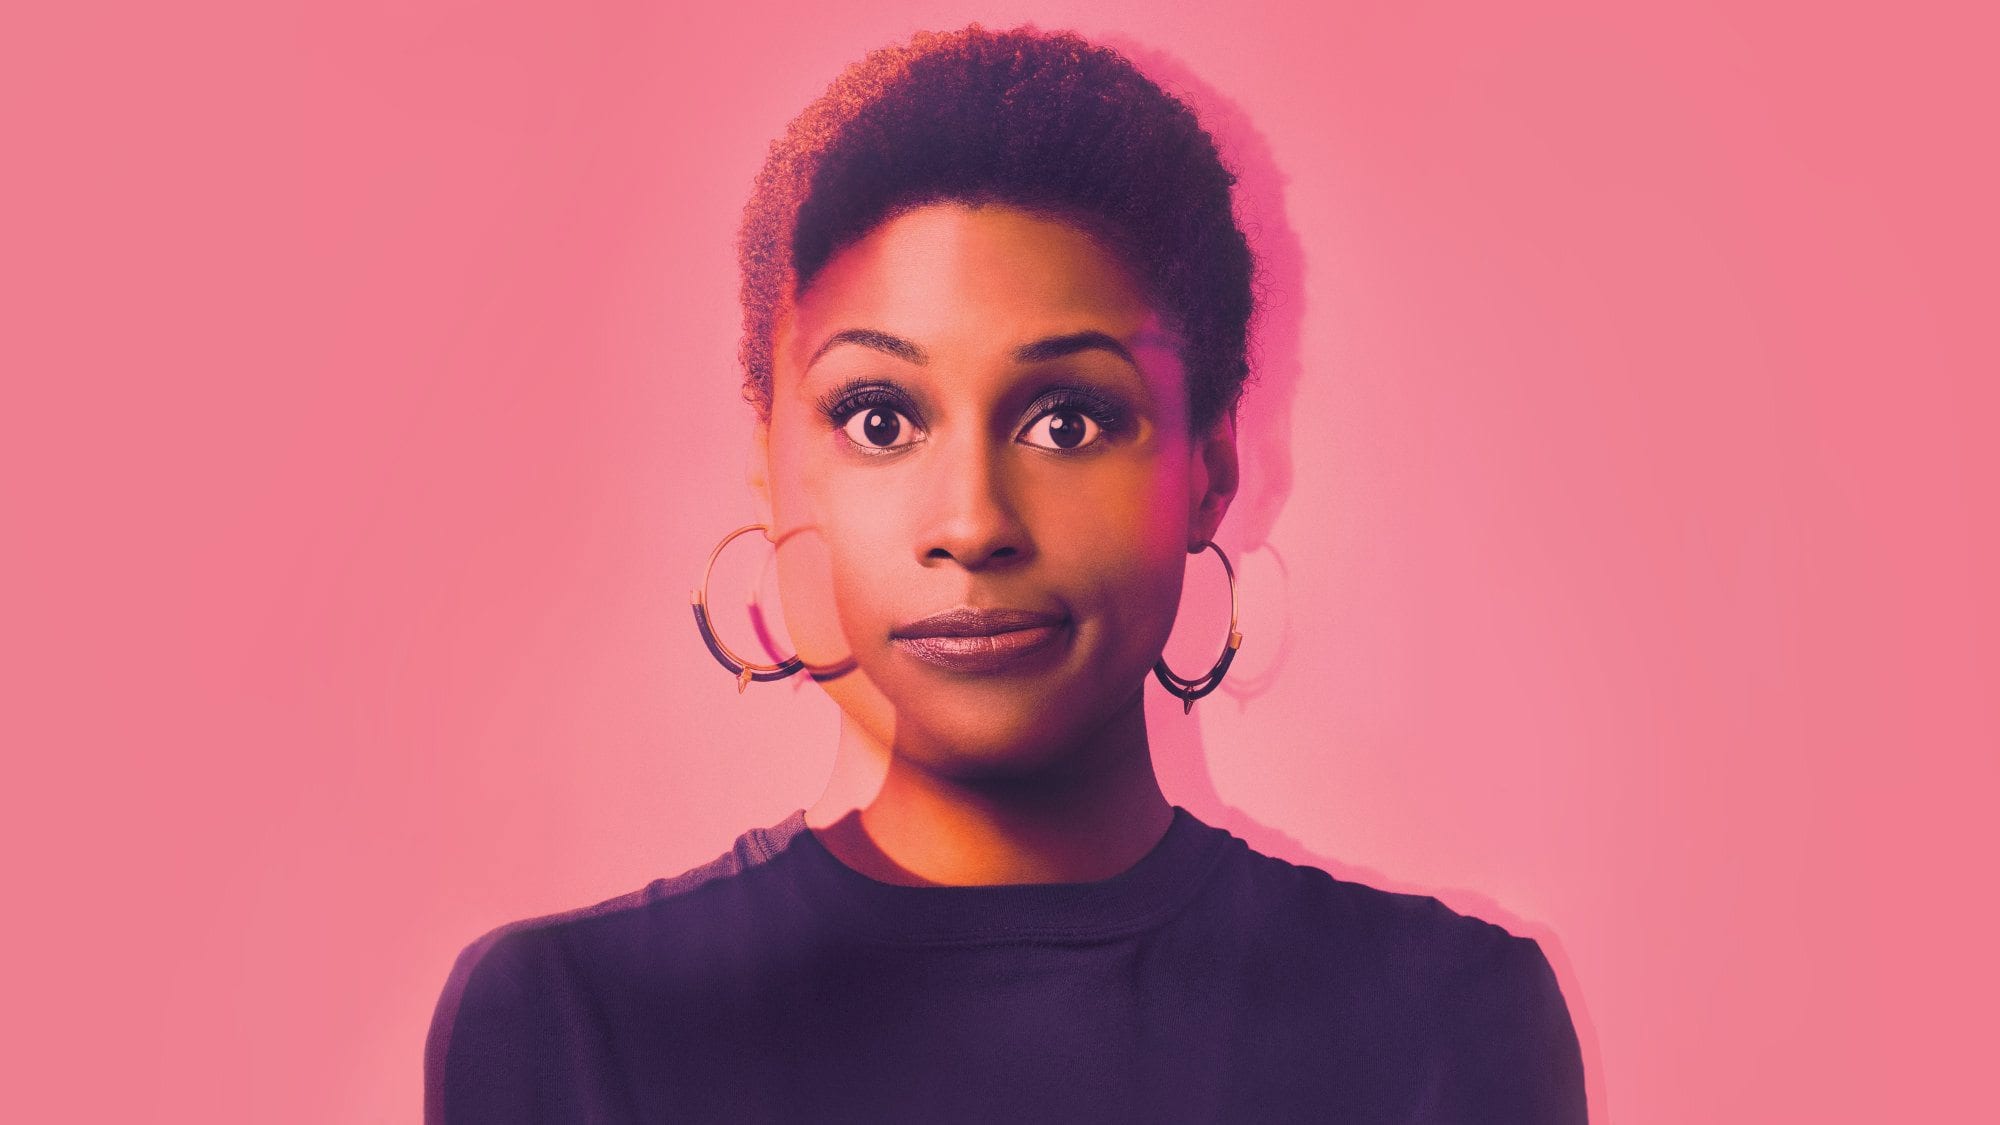 In a recent interview, 'Insecure' creator Issa Rae was questioned about current Twitter posts criticizing certain black content creators for providing visibility only for a “certain kind” of black person, which has led to the term "blavity black".